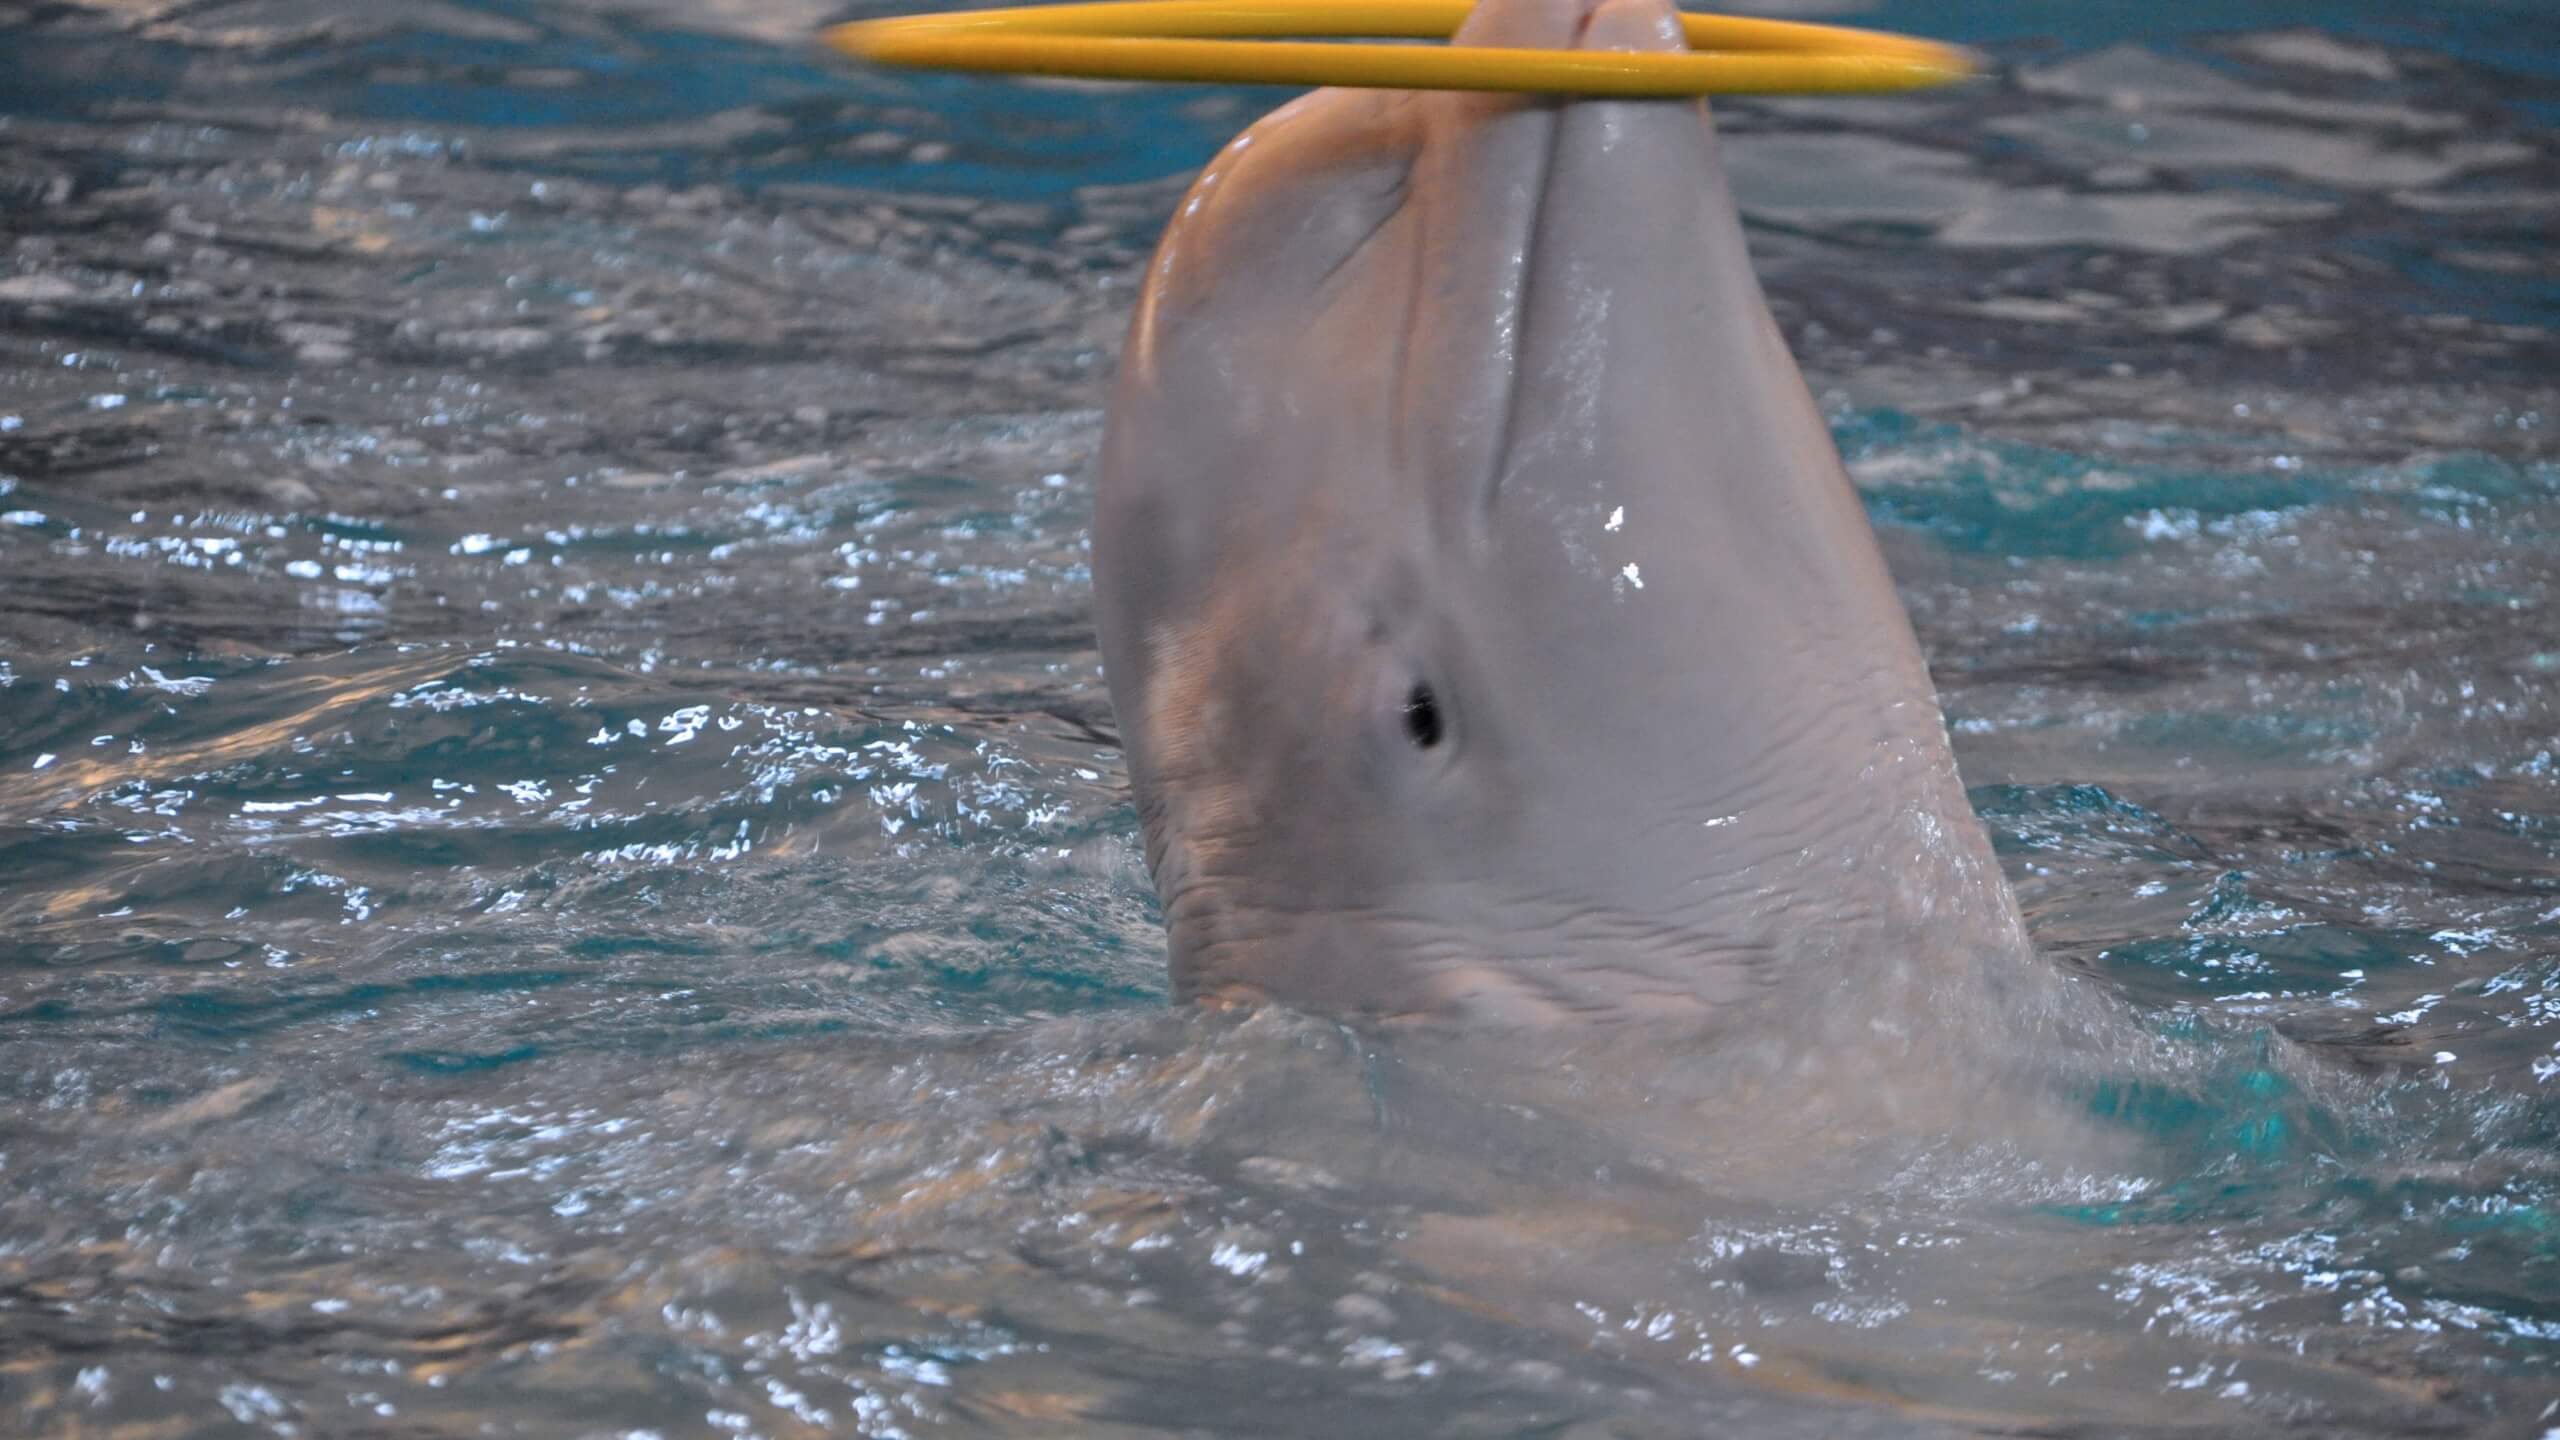 Belugas have also been observed using tools in order to obtain food, a behavior which is only seen in animals capable of higher levels of thought.